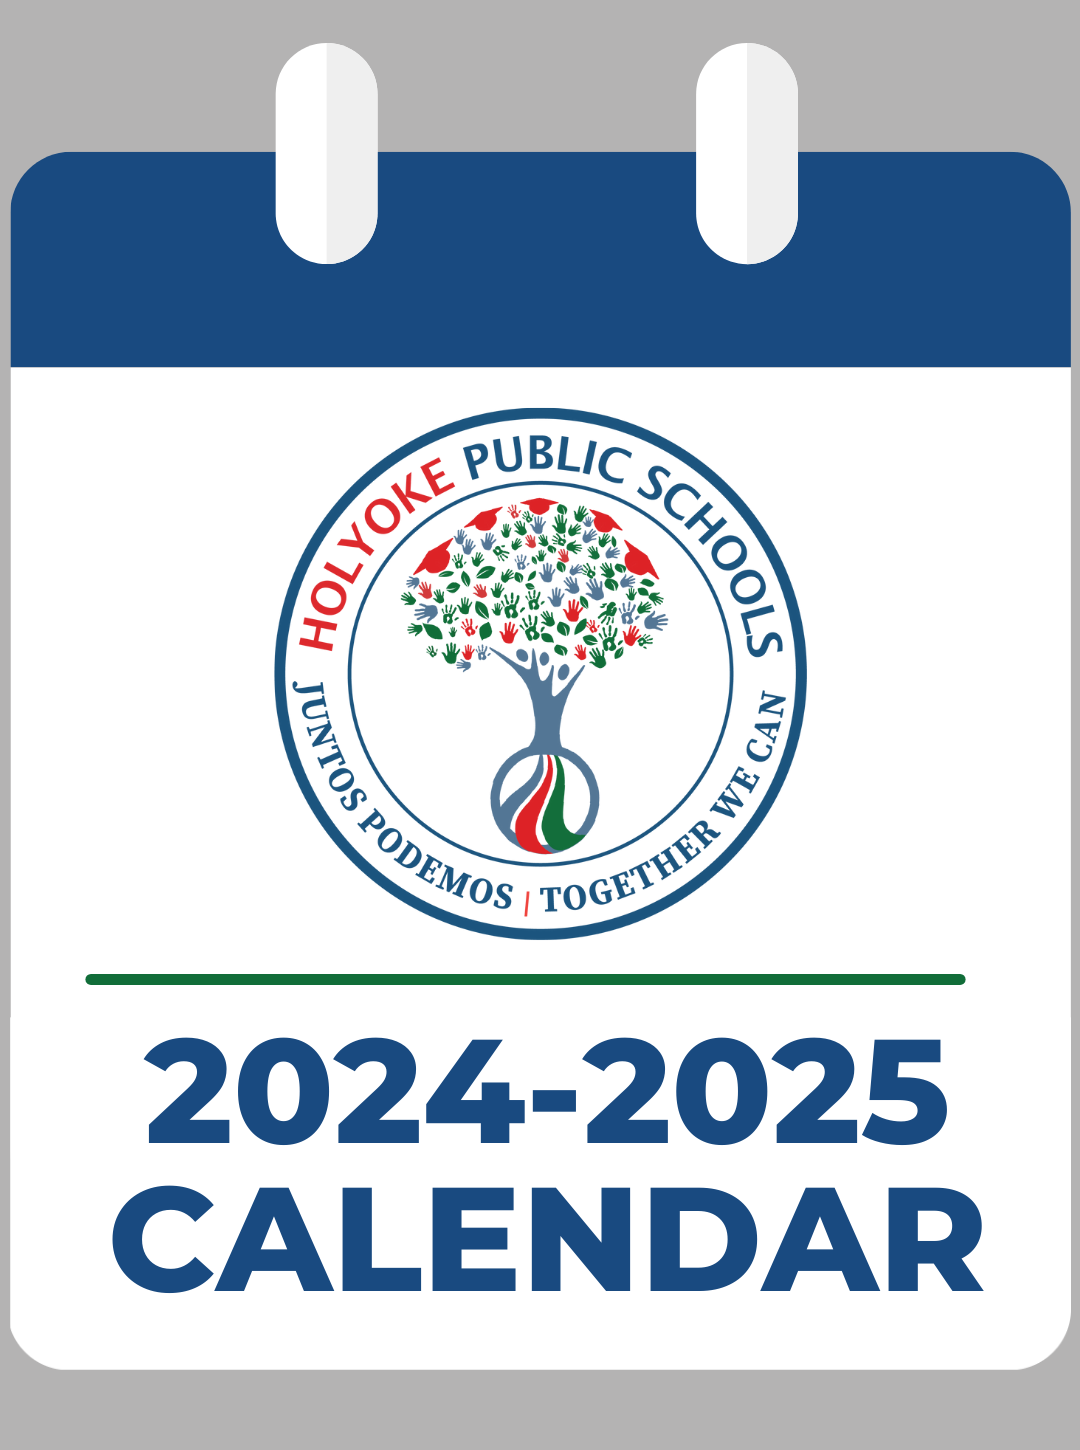 Graphic of HPS logo and words 2024-2025 Calendar.